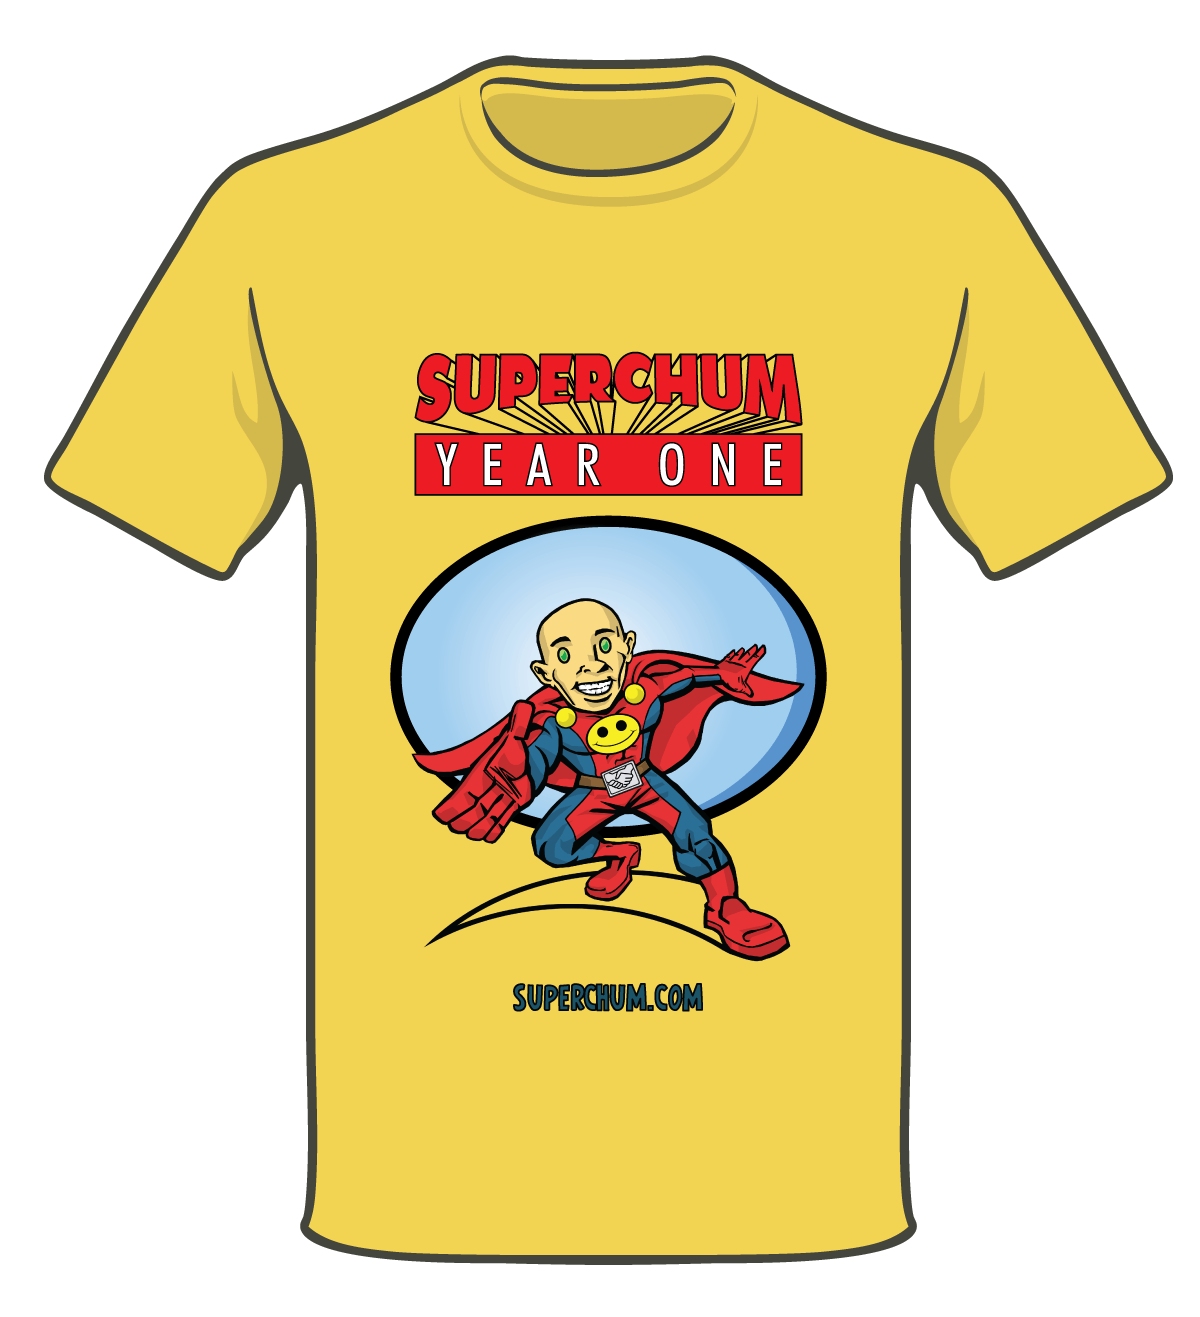 The official Adventures of Superchum T-Shirt